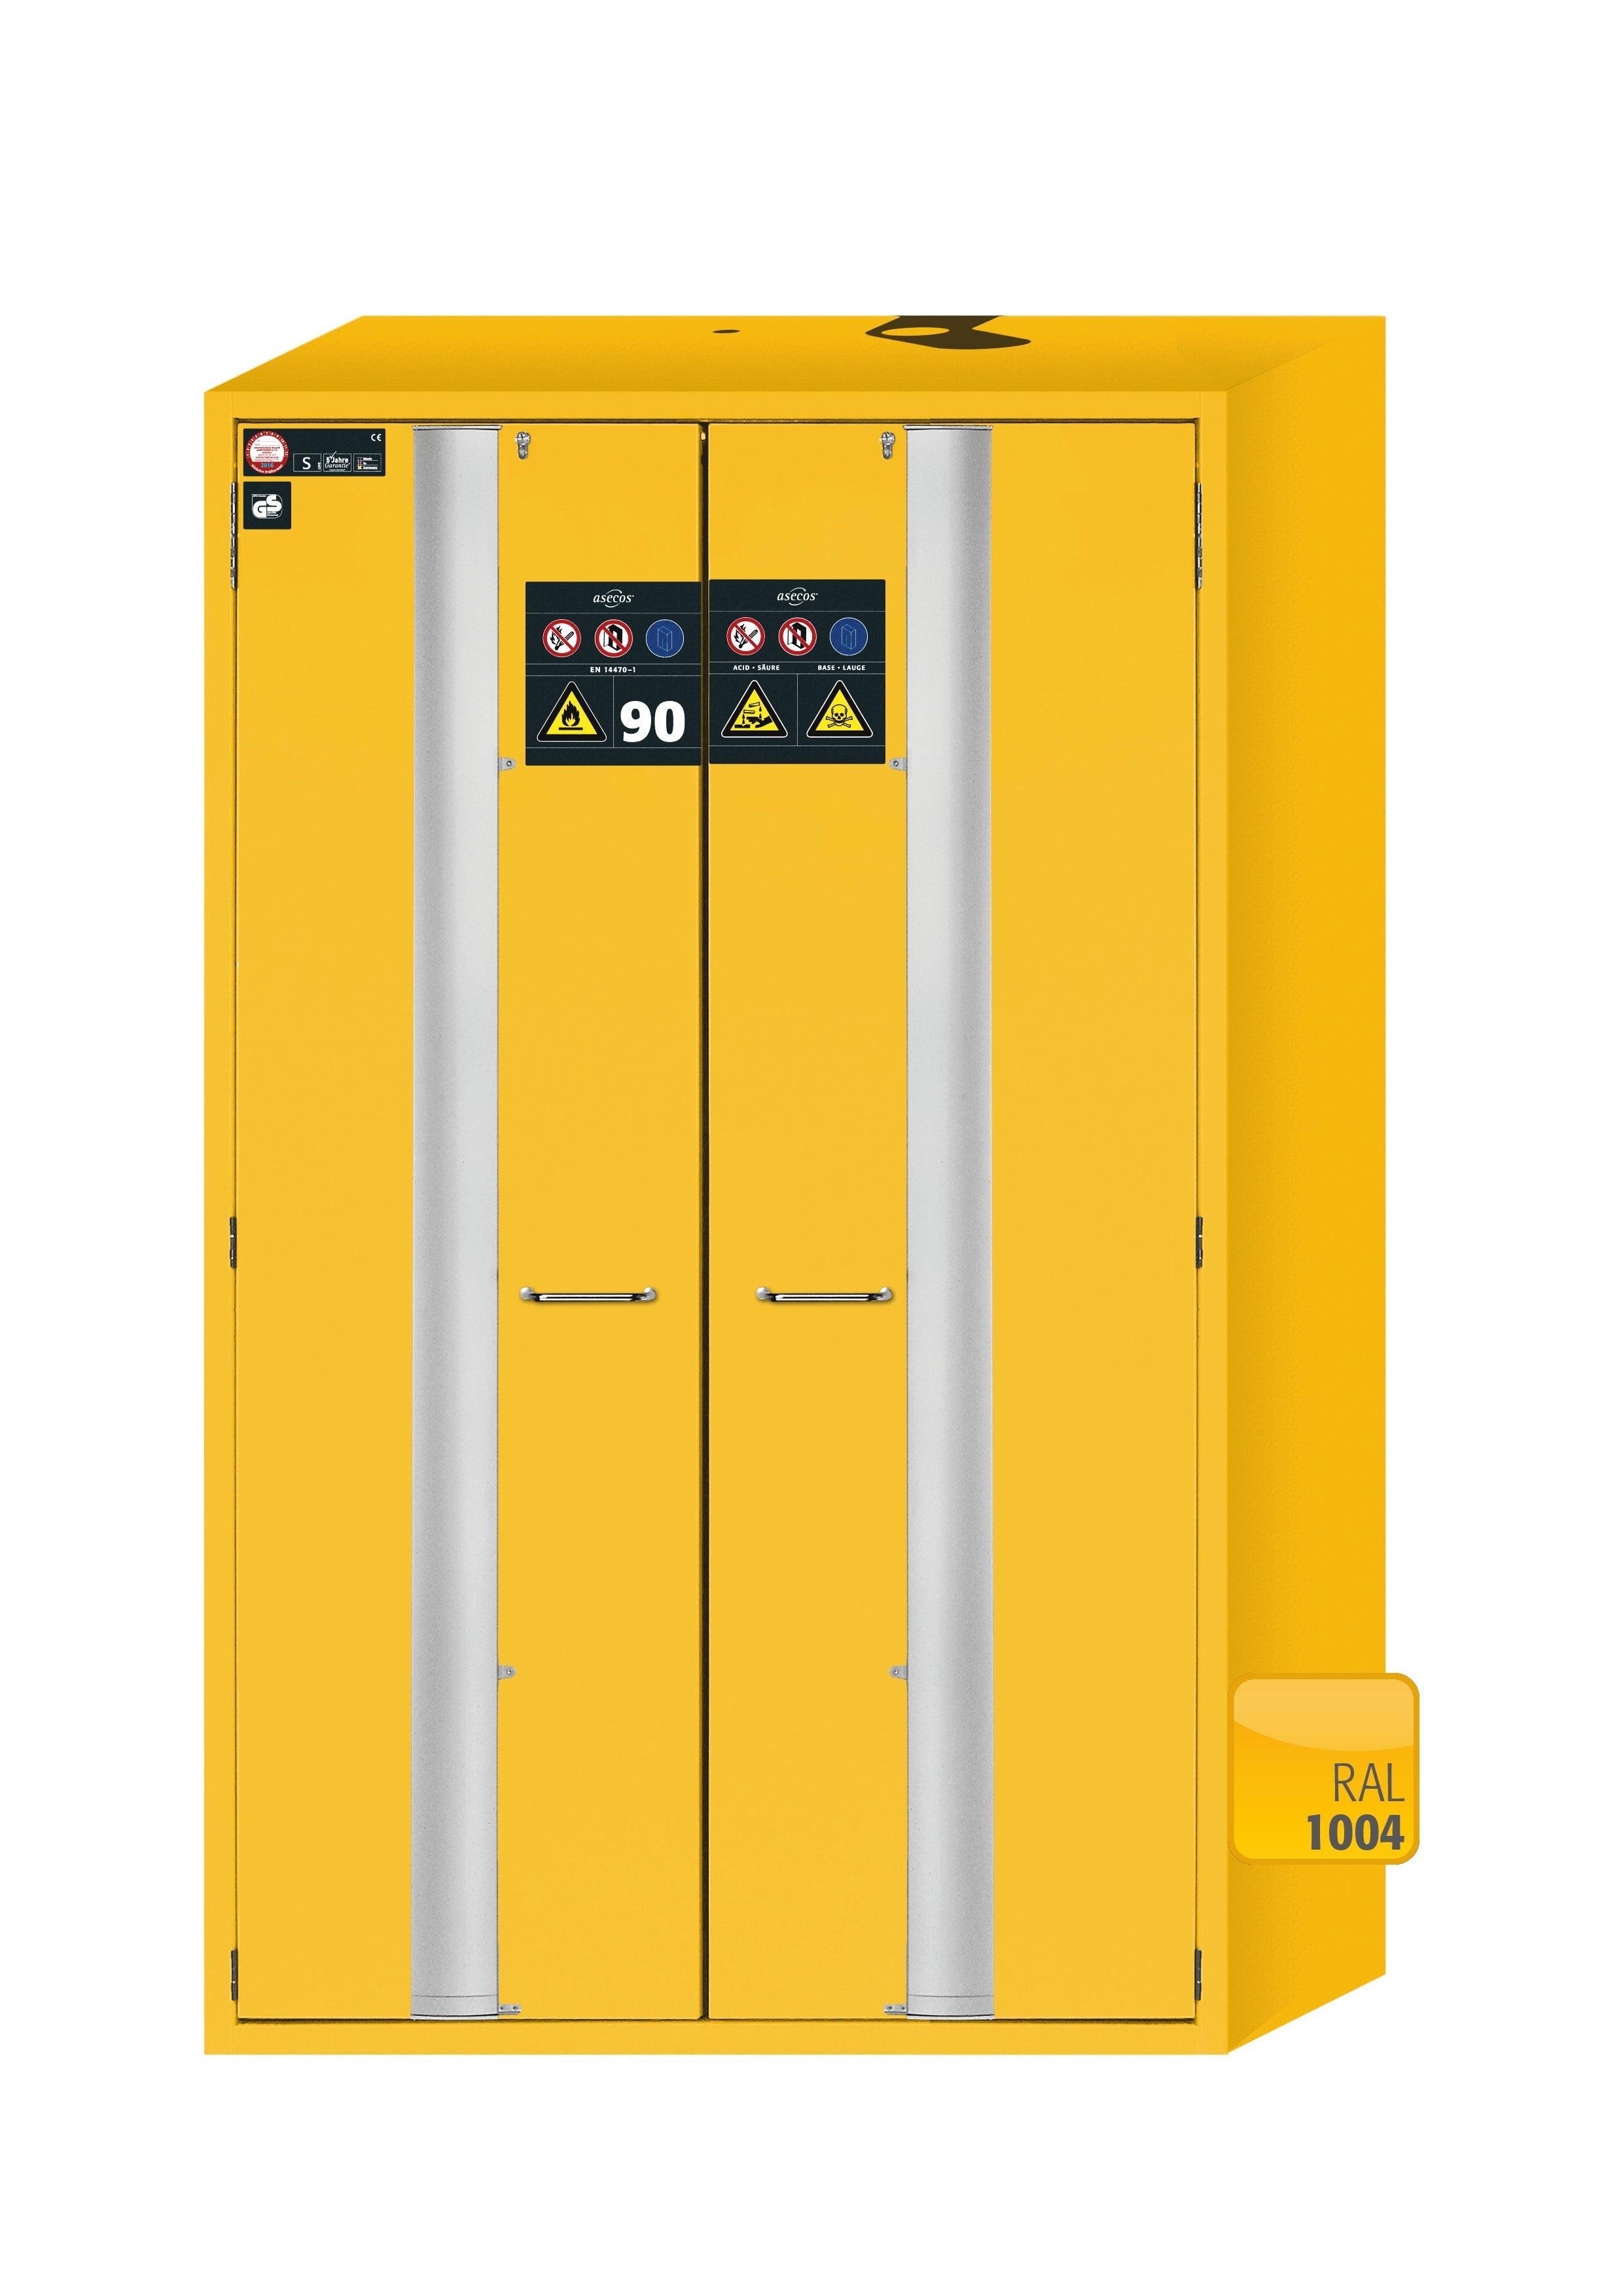 Type 90 safety cabinet S-PHOENIX-90 model S90.196.120.MV.FDAS in safety yellow RAL 1004 with 6x standard pull-out tray (sheet steel)